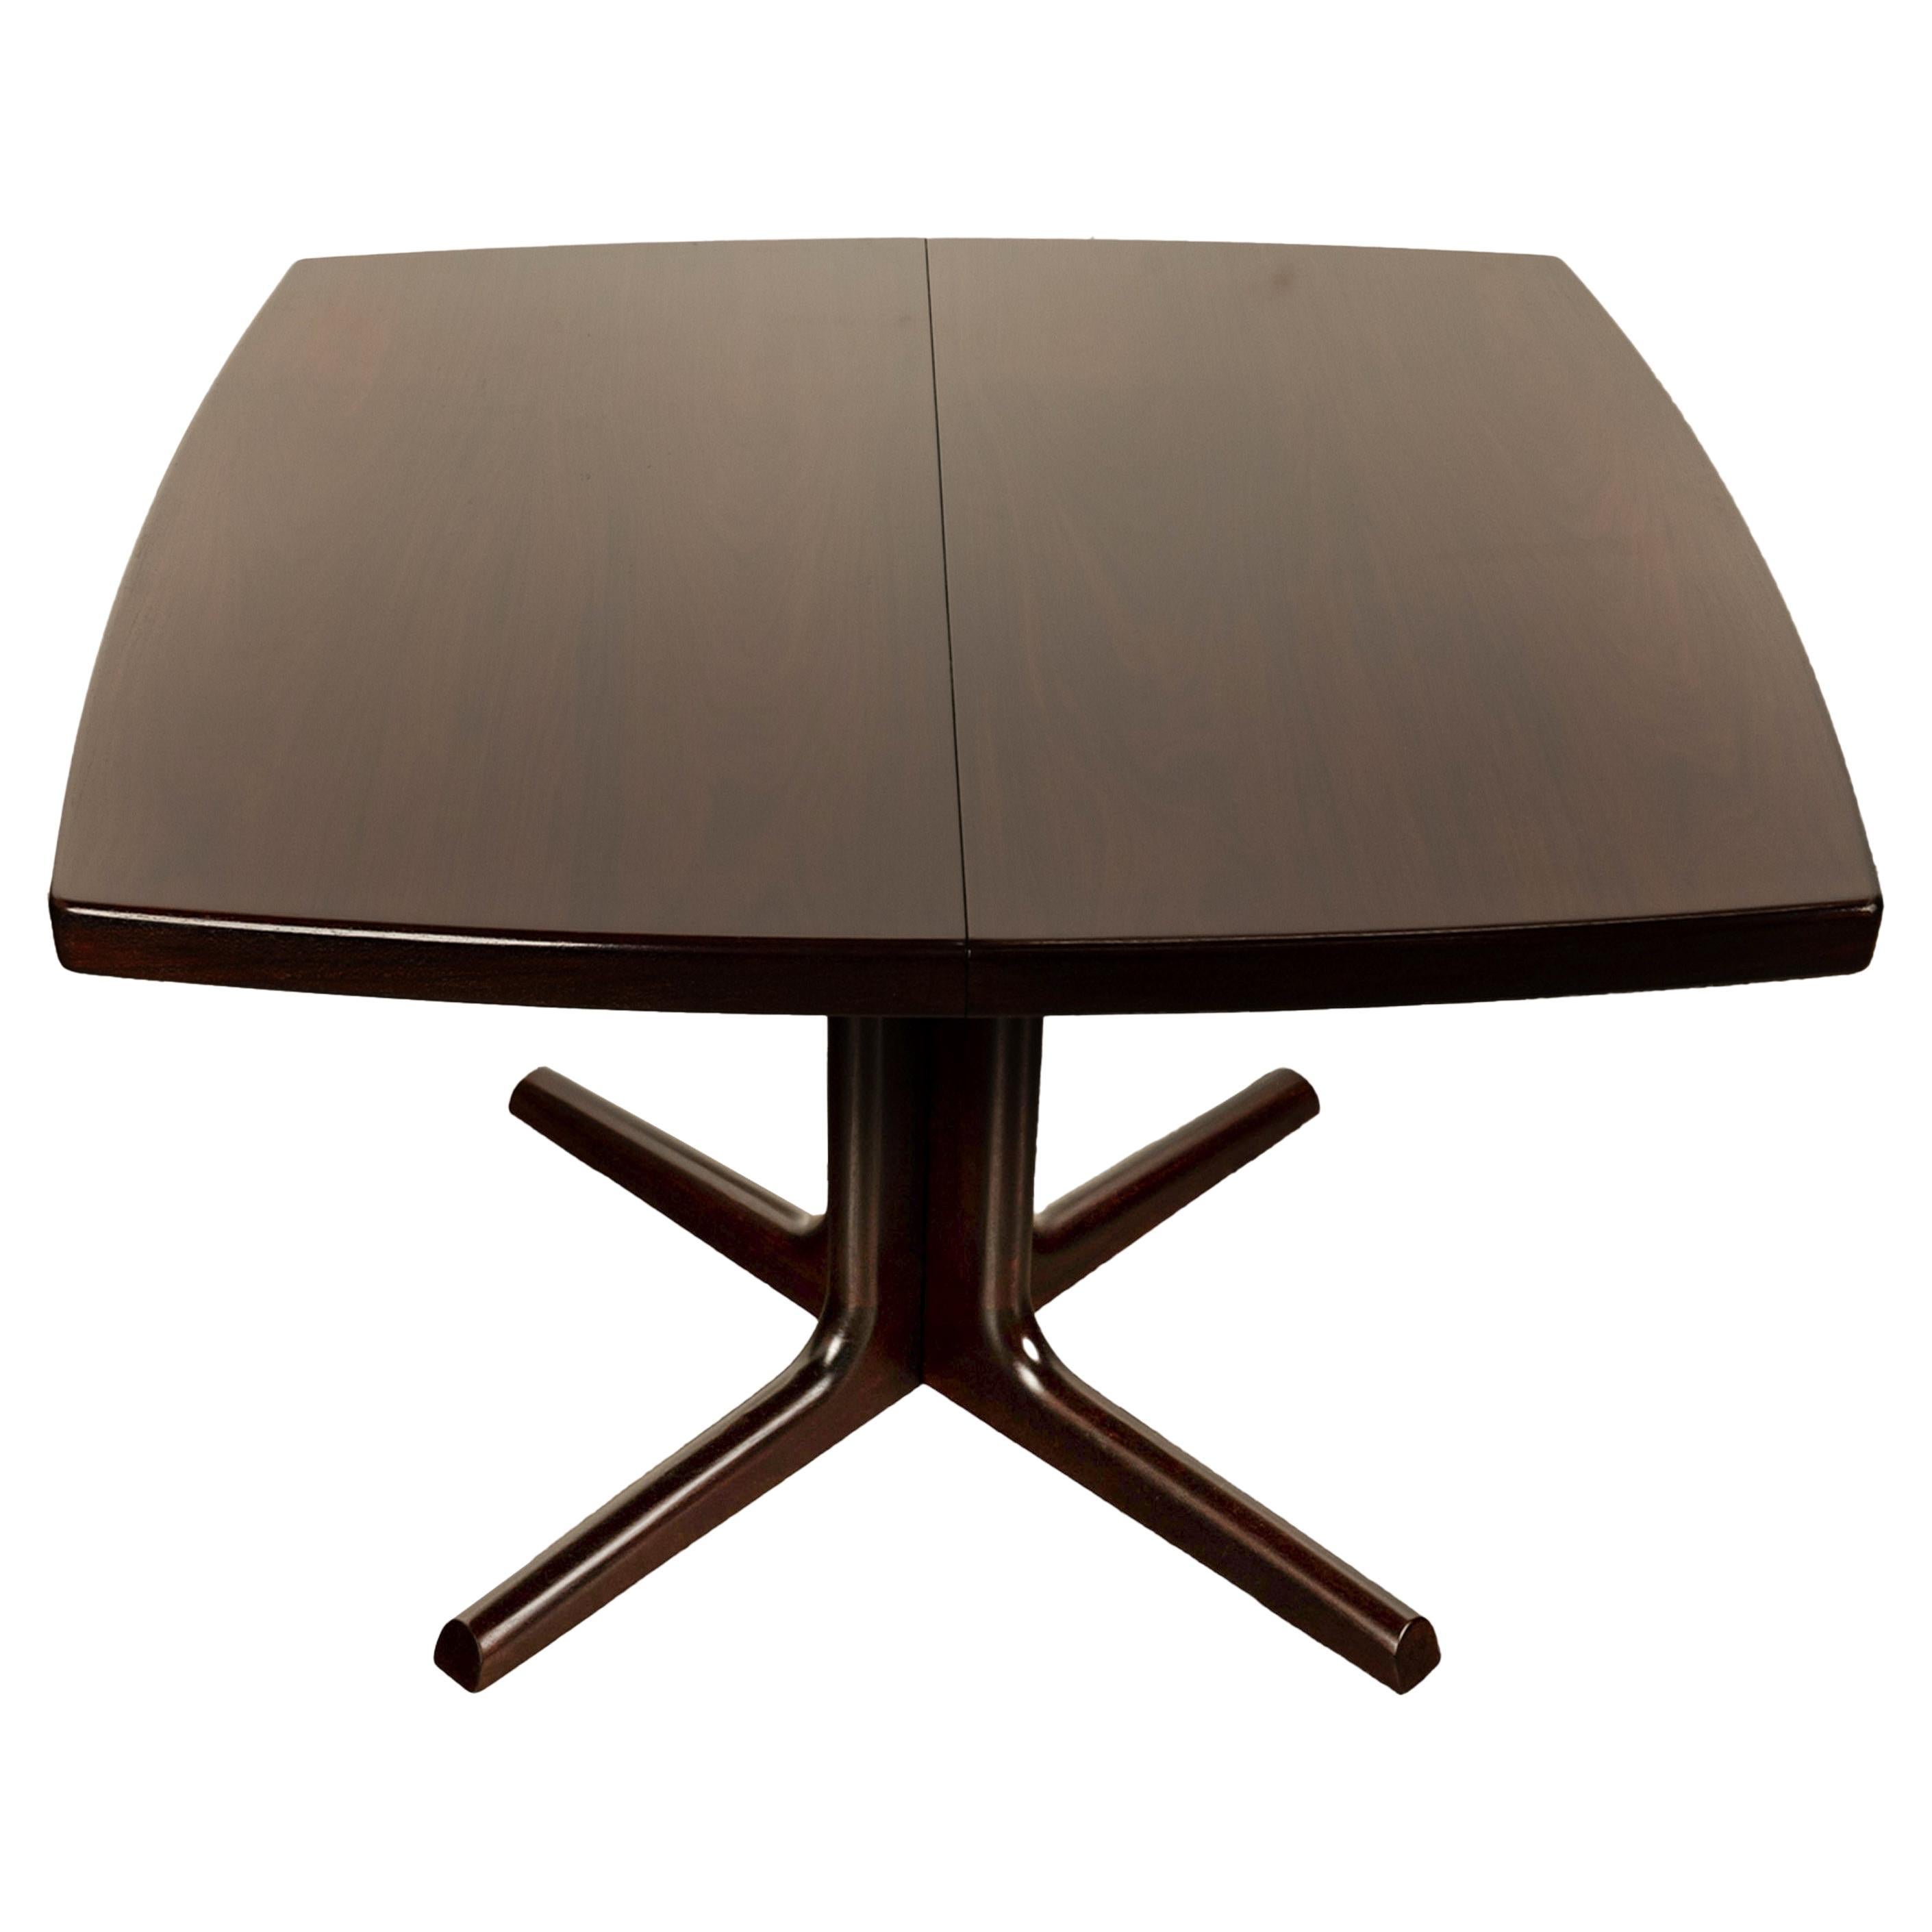 A very good Mid Century Modern Danish rosewood extending dining table with two leaves, by Farstrup Mobler, circa 1965.
This very stylish Danish MCM table having gently curved sides & ends, it is almost square without the leaves inserted, perfect for